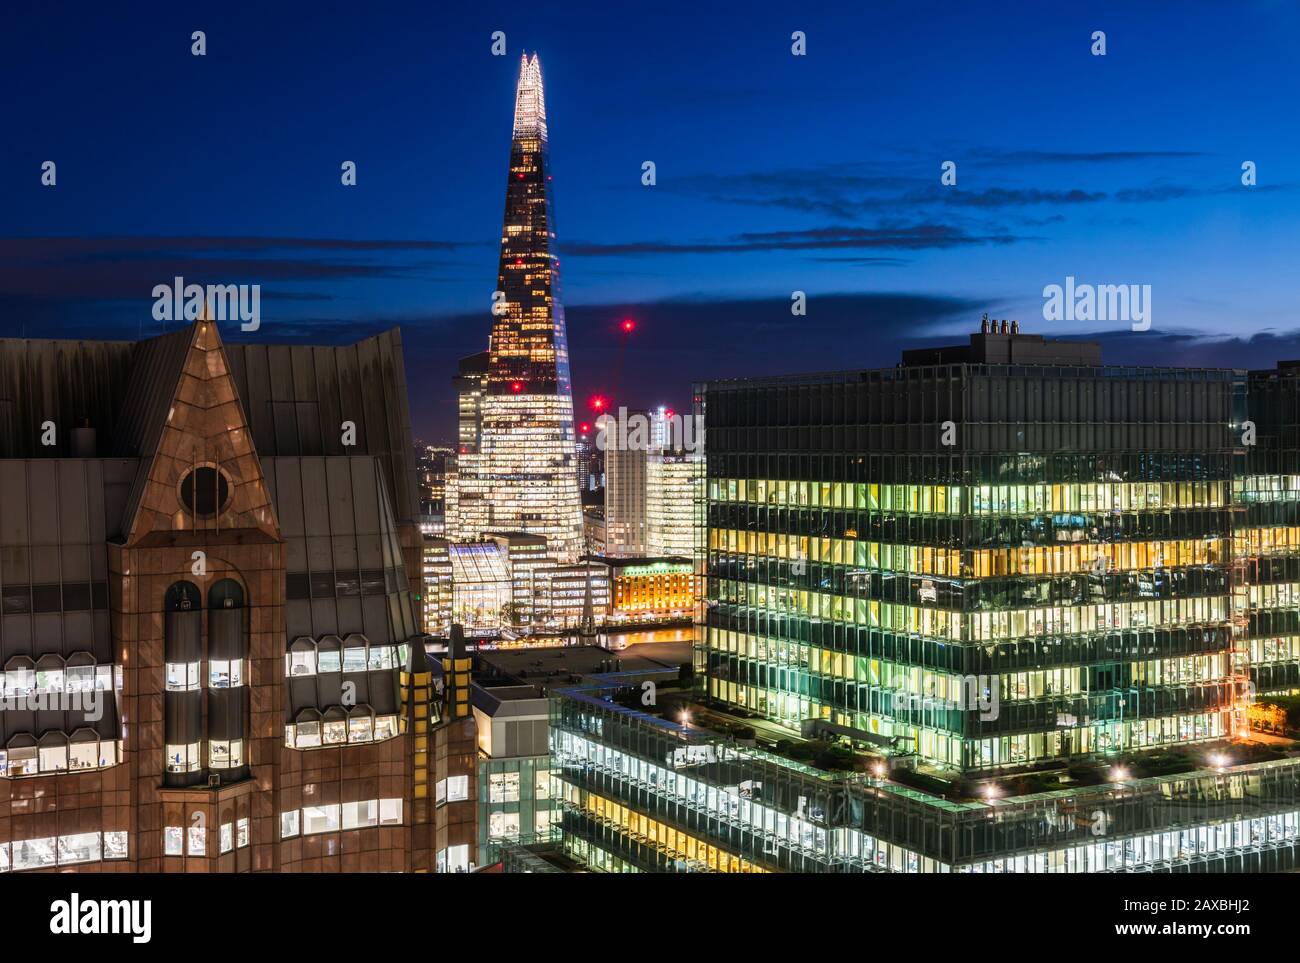 Elevated view of The Shard in London lit up at night Stock Photo